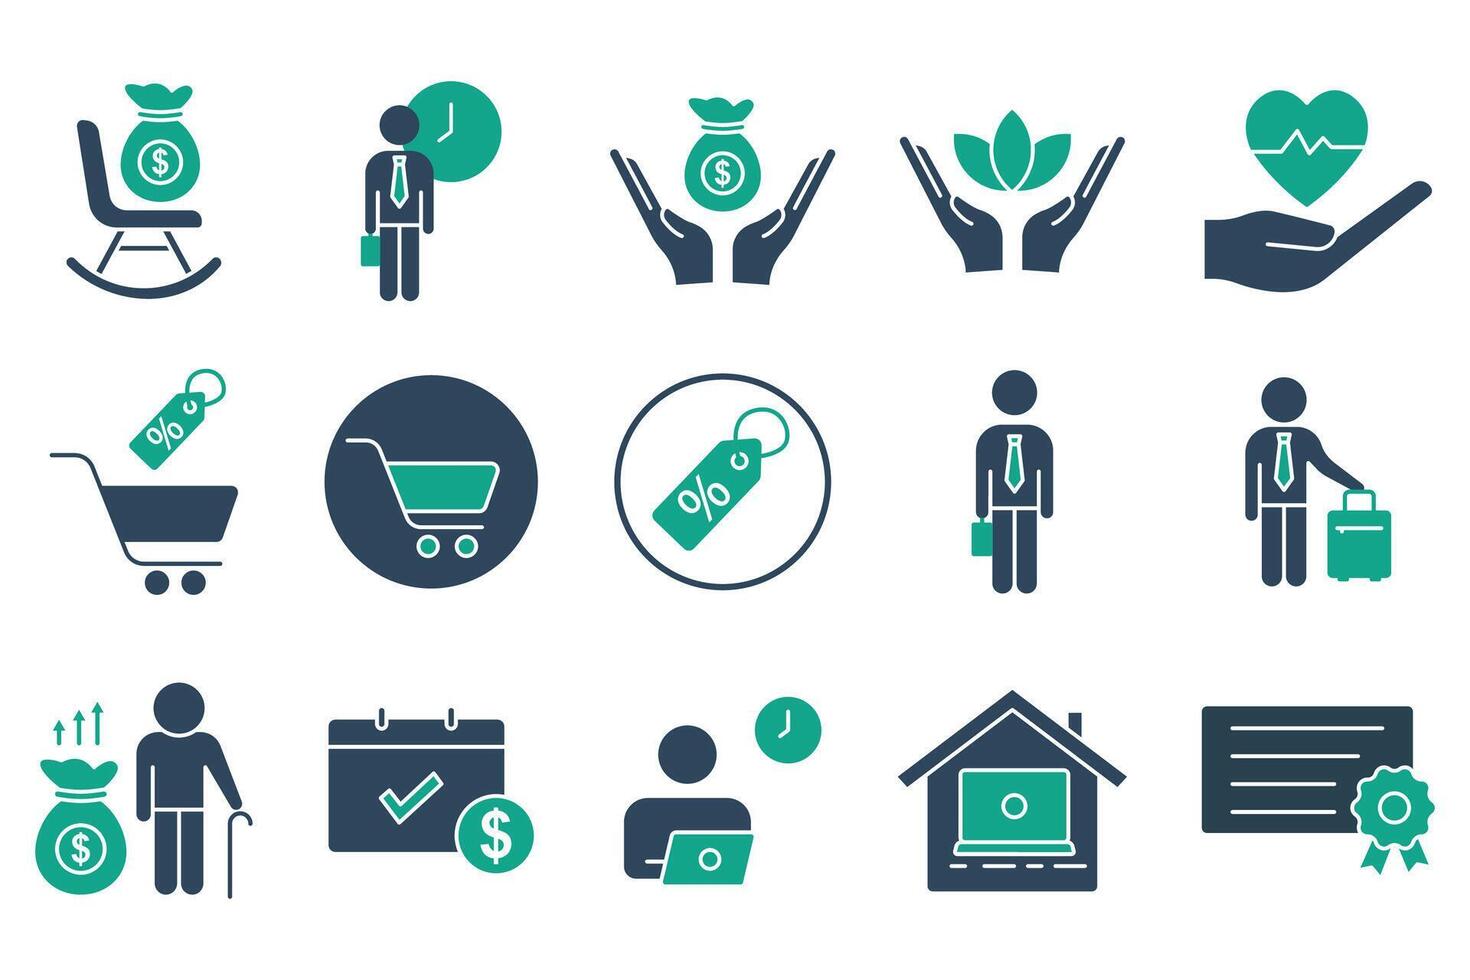 employee benefits icon set. contains icon retirement plan, flexible working, certificate, bonus, etc. solid icon style. business element vector illustration